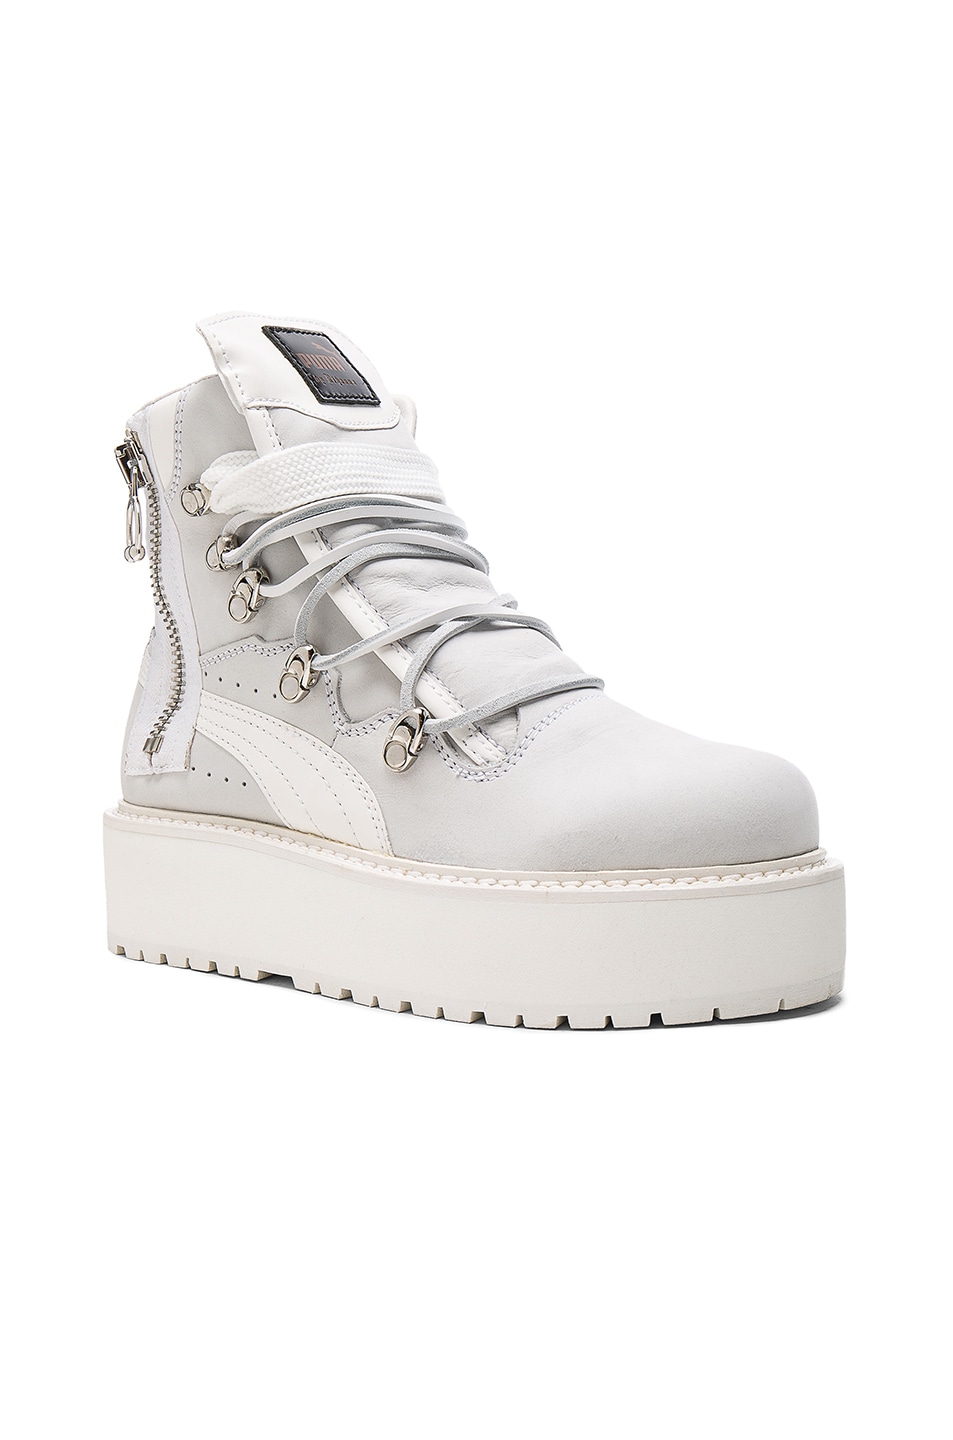 Fenty by Puma Leather Sneaker Boots in White | FWRD